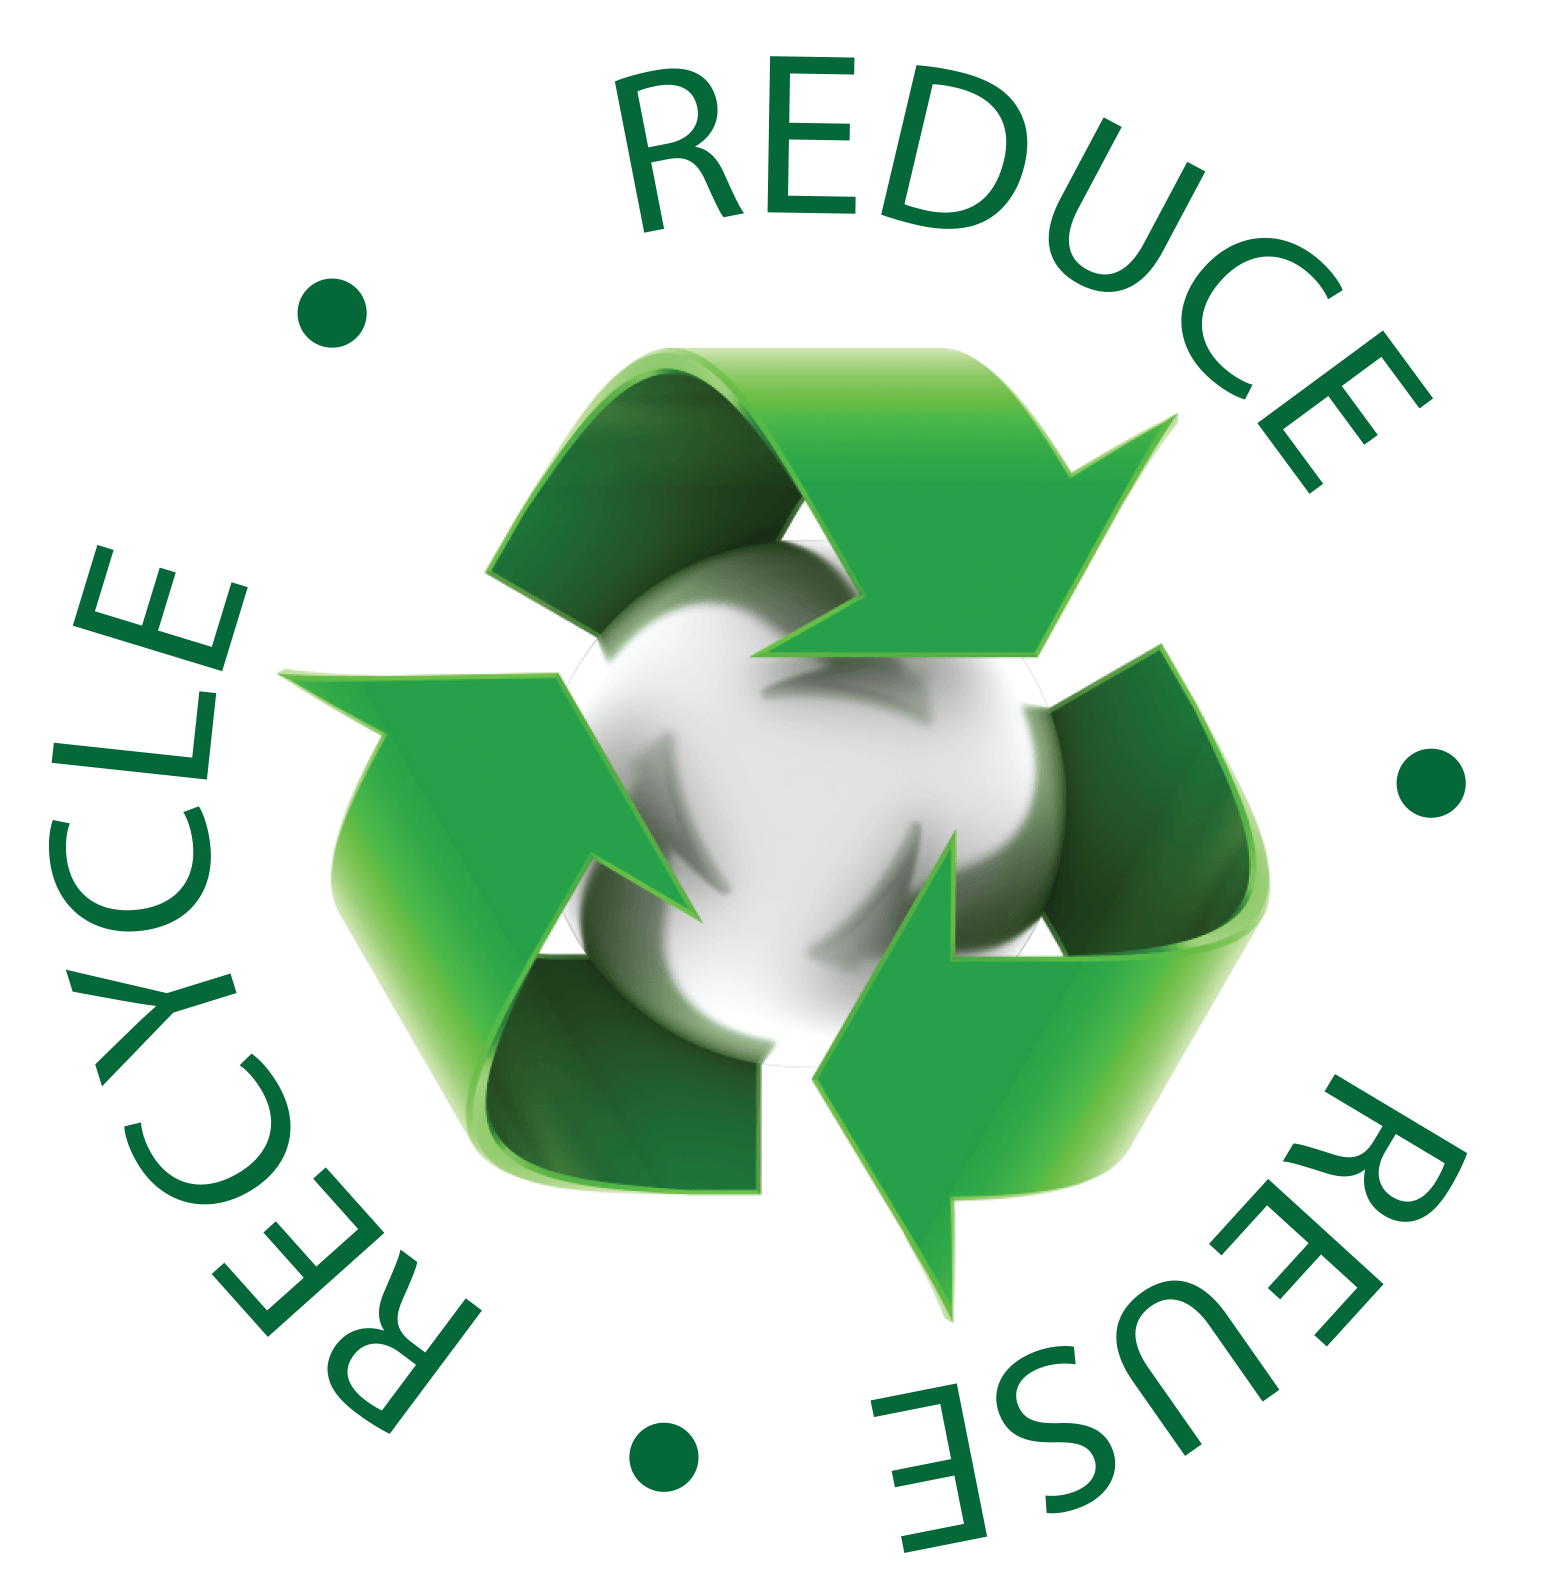 Reduce Logo - Reduce Reuse Recycle Logo | Free All Download | Recycle logo ...